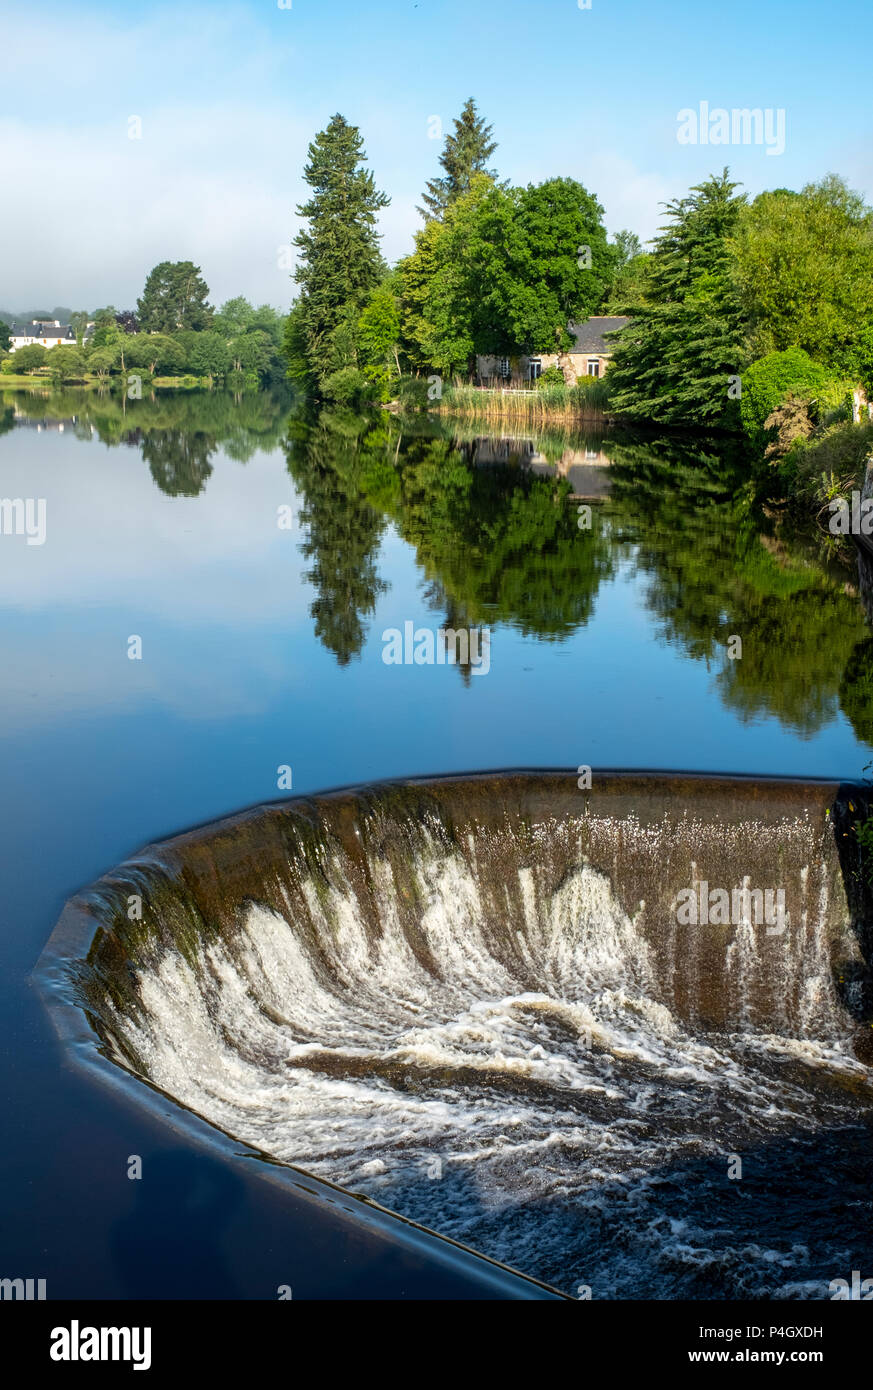 Water flowing from the lake in Huelgoat, Finistère, Brittany, France, Europe Stock Photo